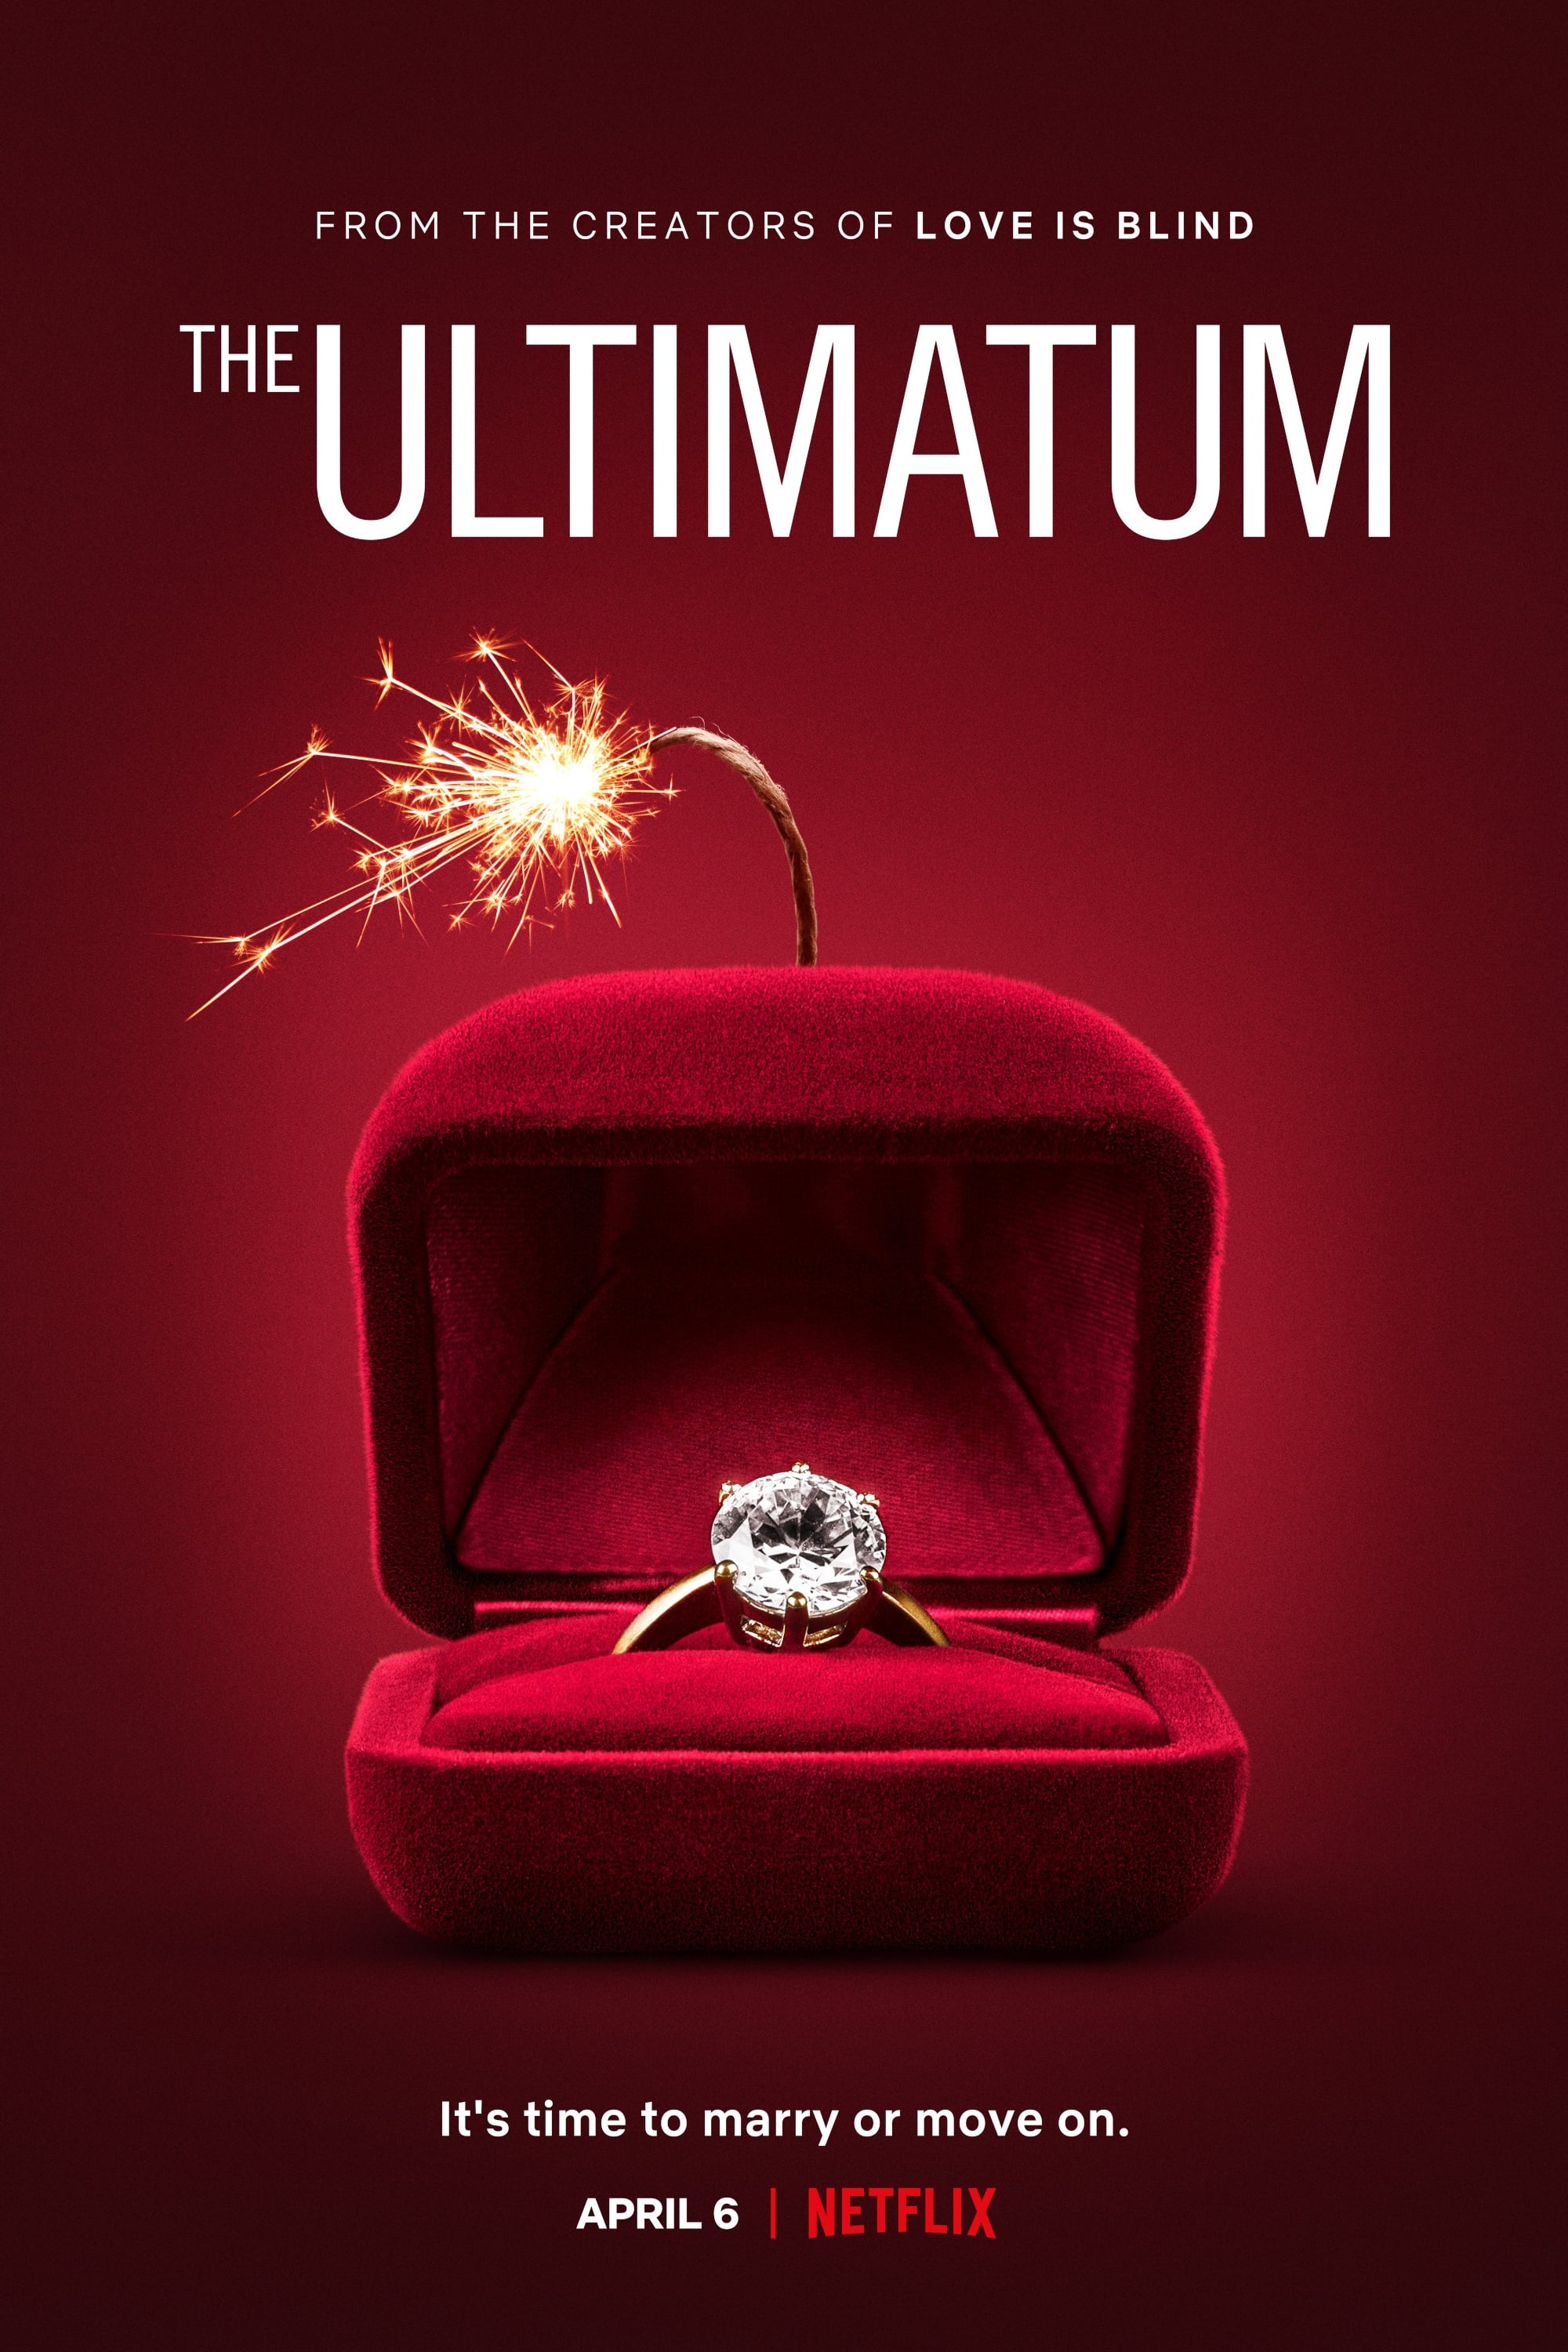 The Ultimatum: Marry or Move On TV Shows About Dating Show